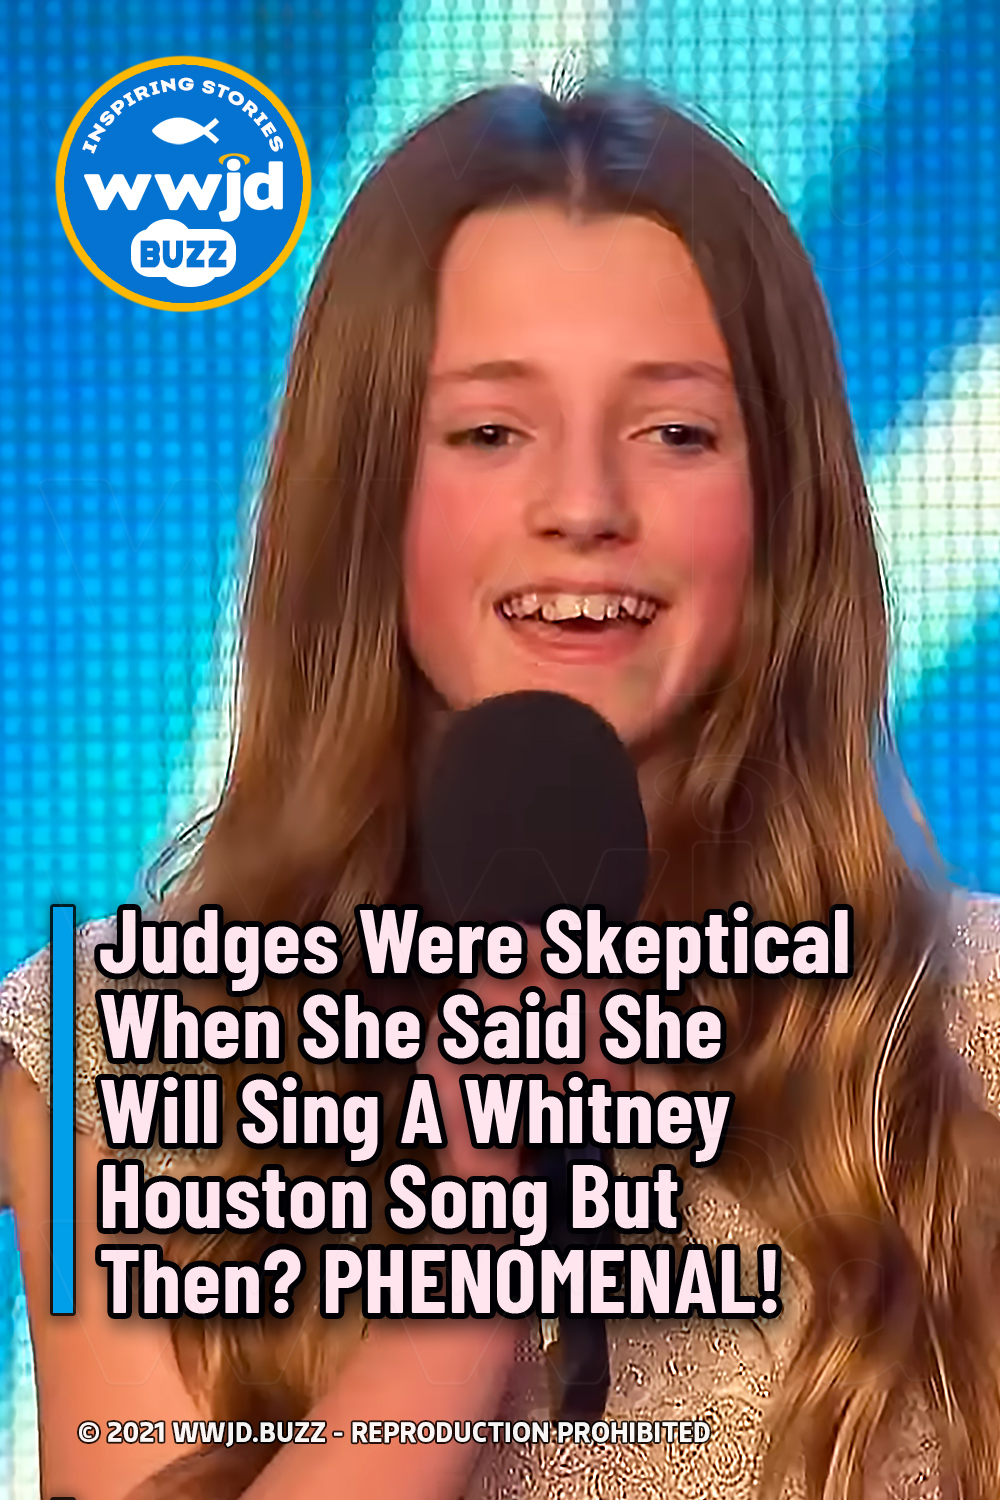 Judges Were Skeptical When She Said She Will Sing A Whitney Houston Song But Then? PHENOMENAL!